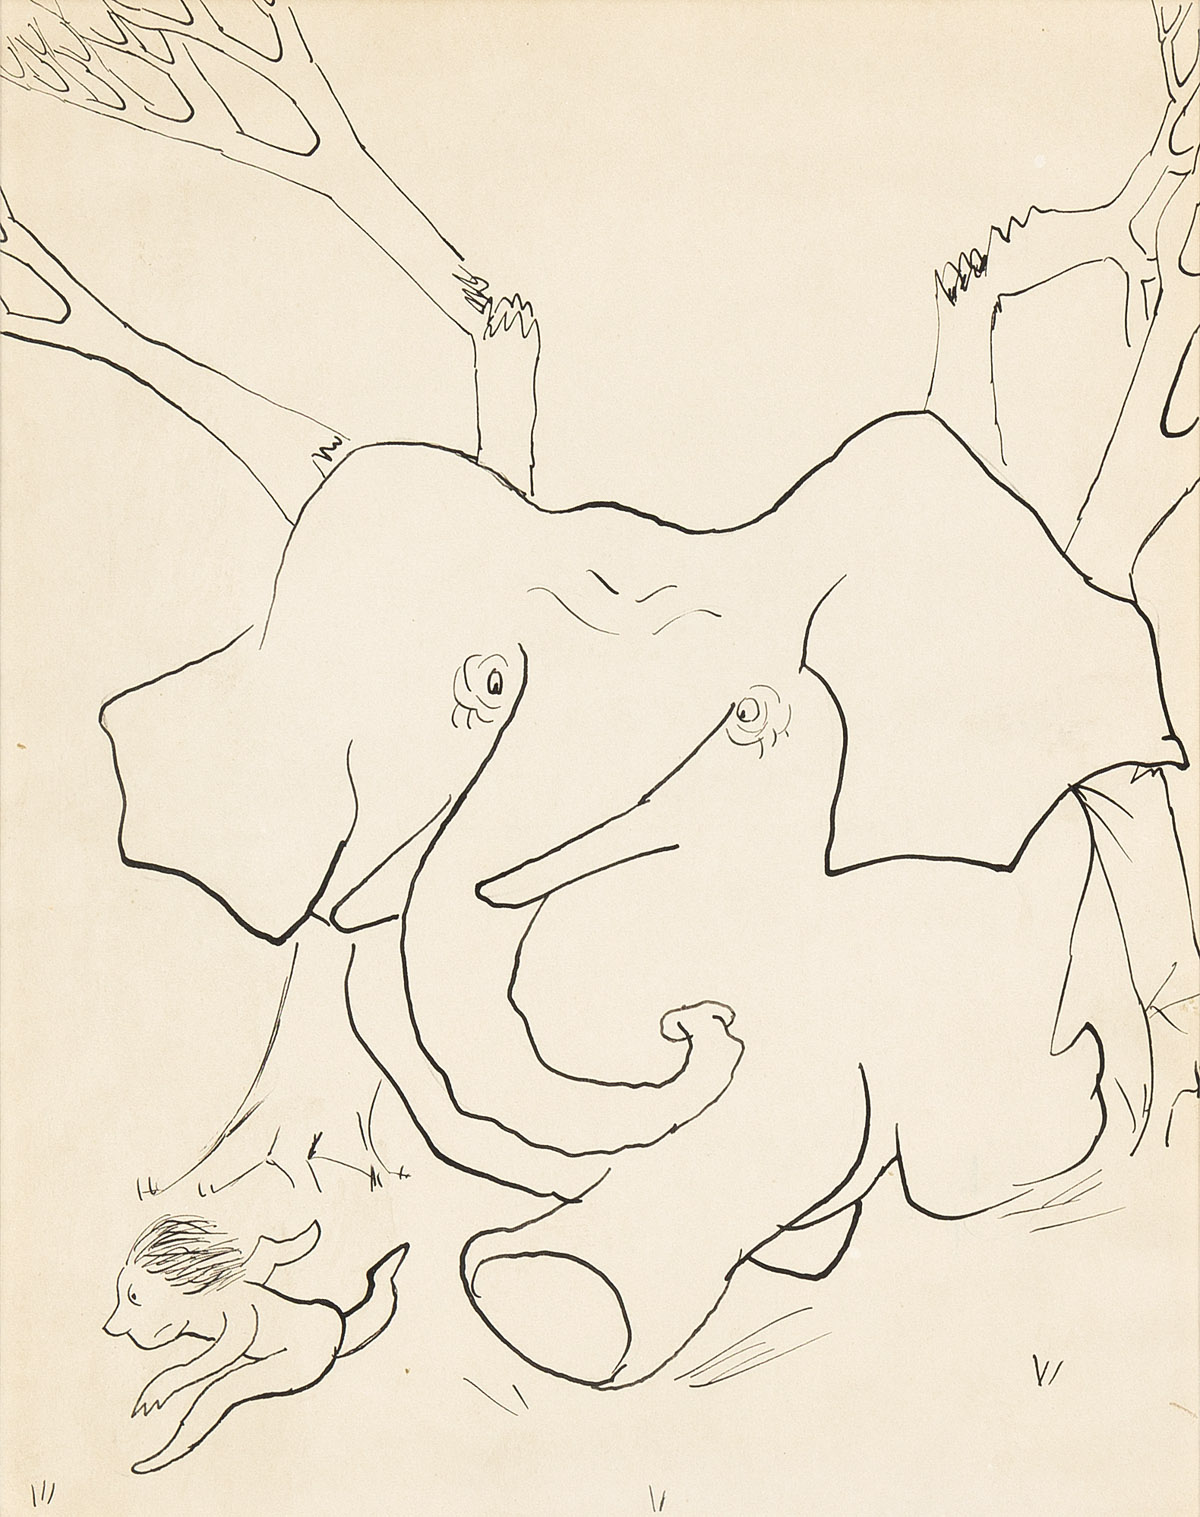 JAMES THURBER (1894-1961) The Elephant and the Hunter.